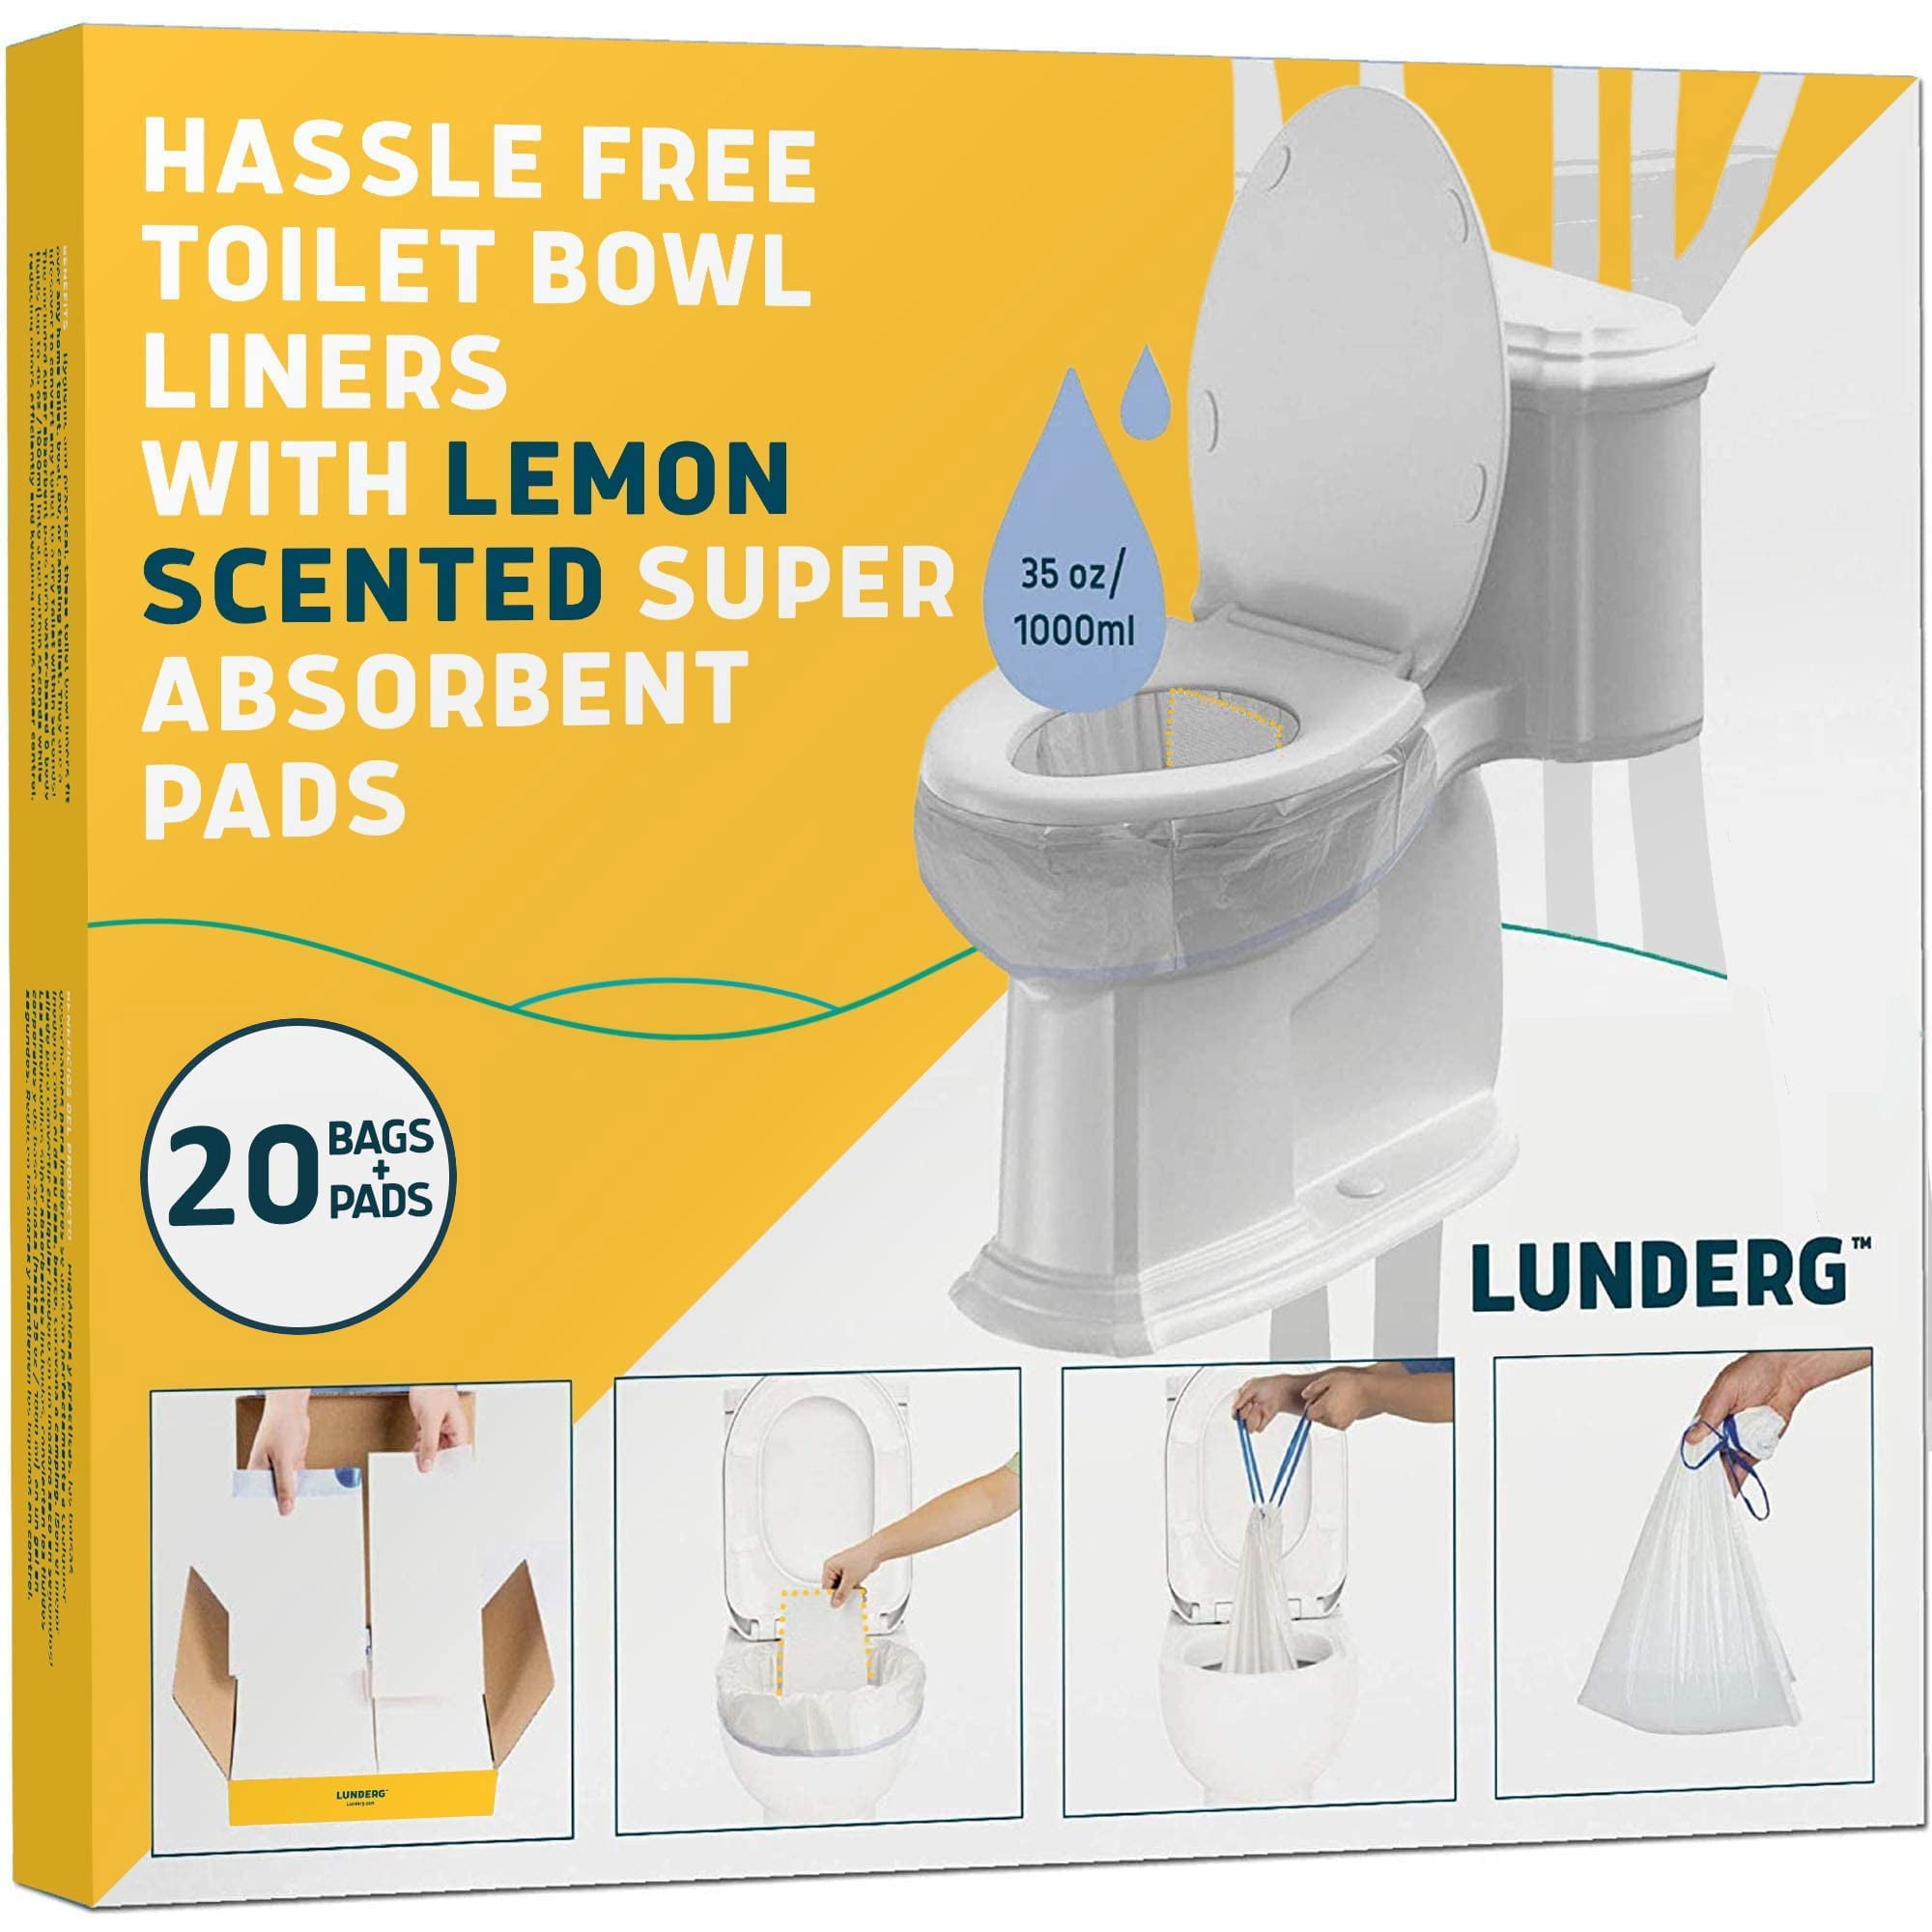 Lunderg Toilet Bowl Liners with Lemon Scented Super Absorbent Pads, 20 ct